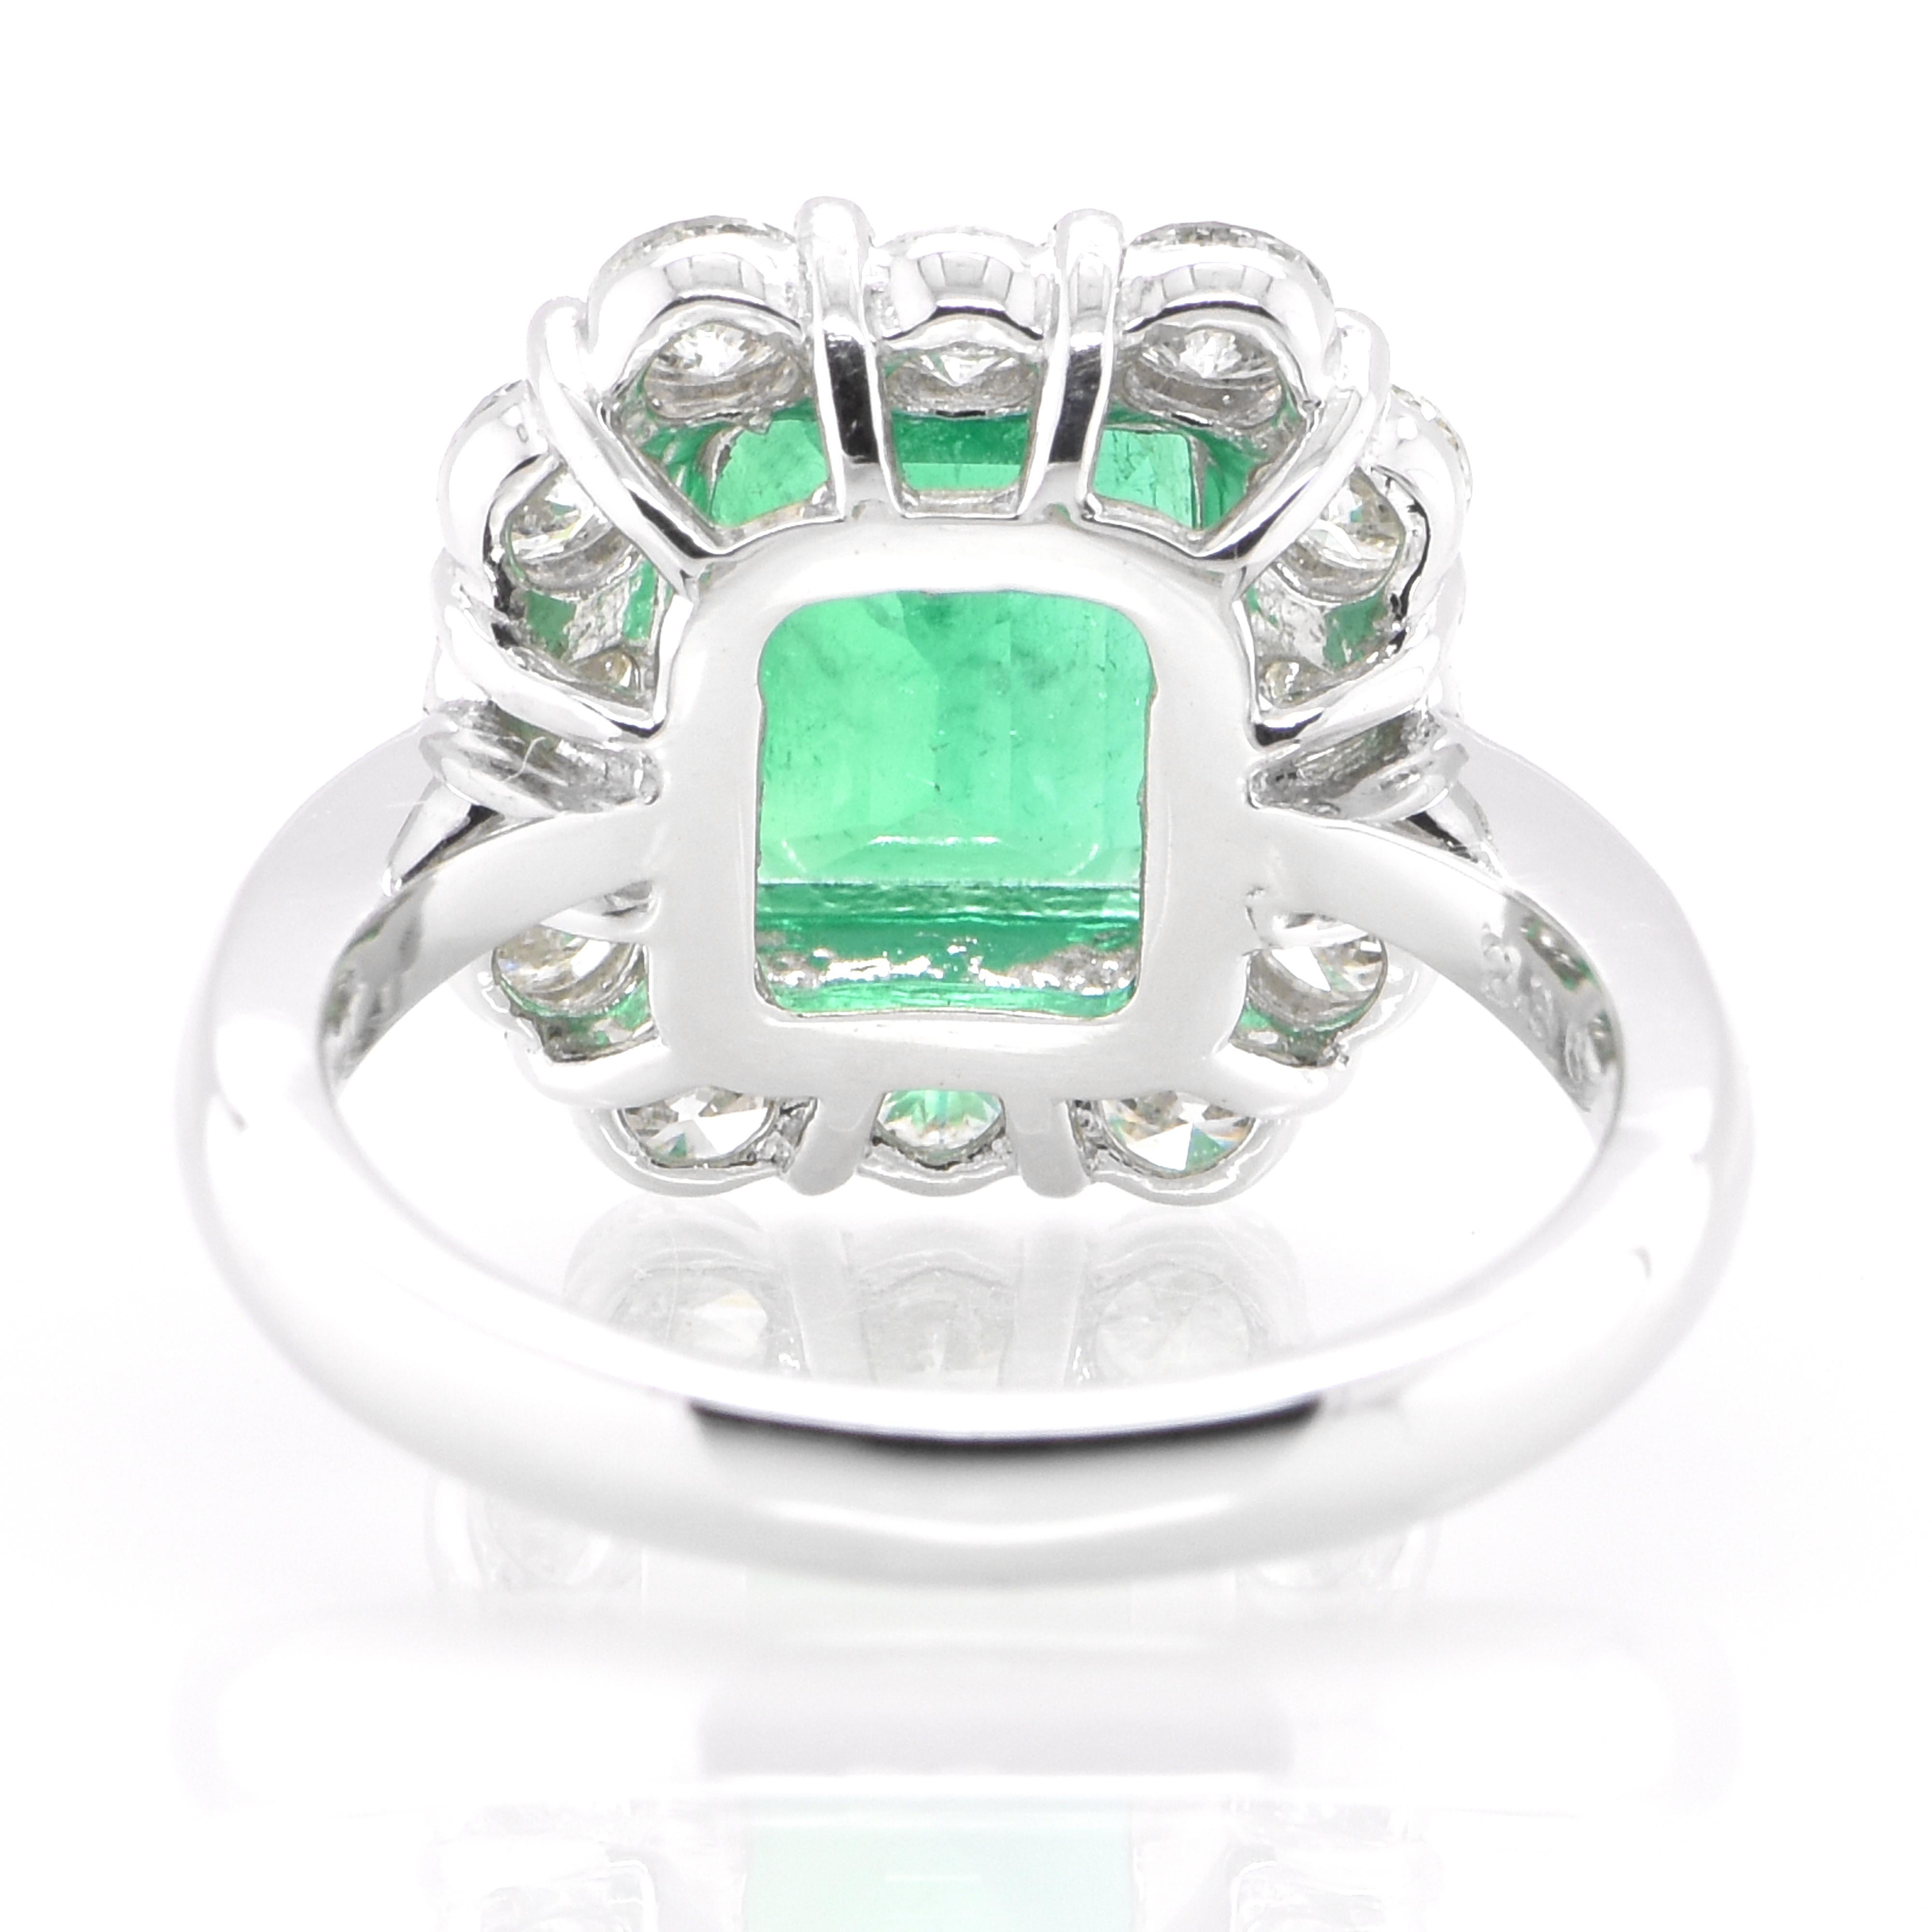 2.36 Carat Natural Colombian Emerald and Diamond Ring Set in Platinum 1